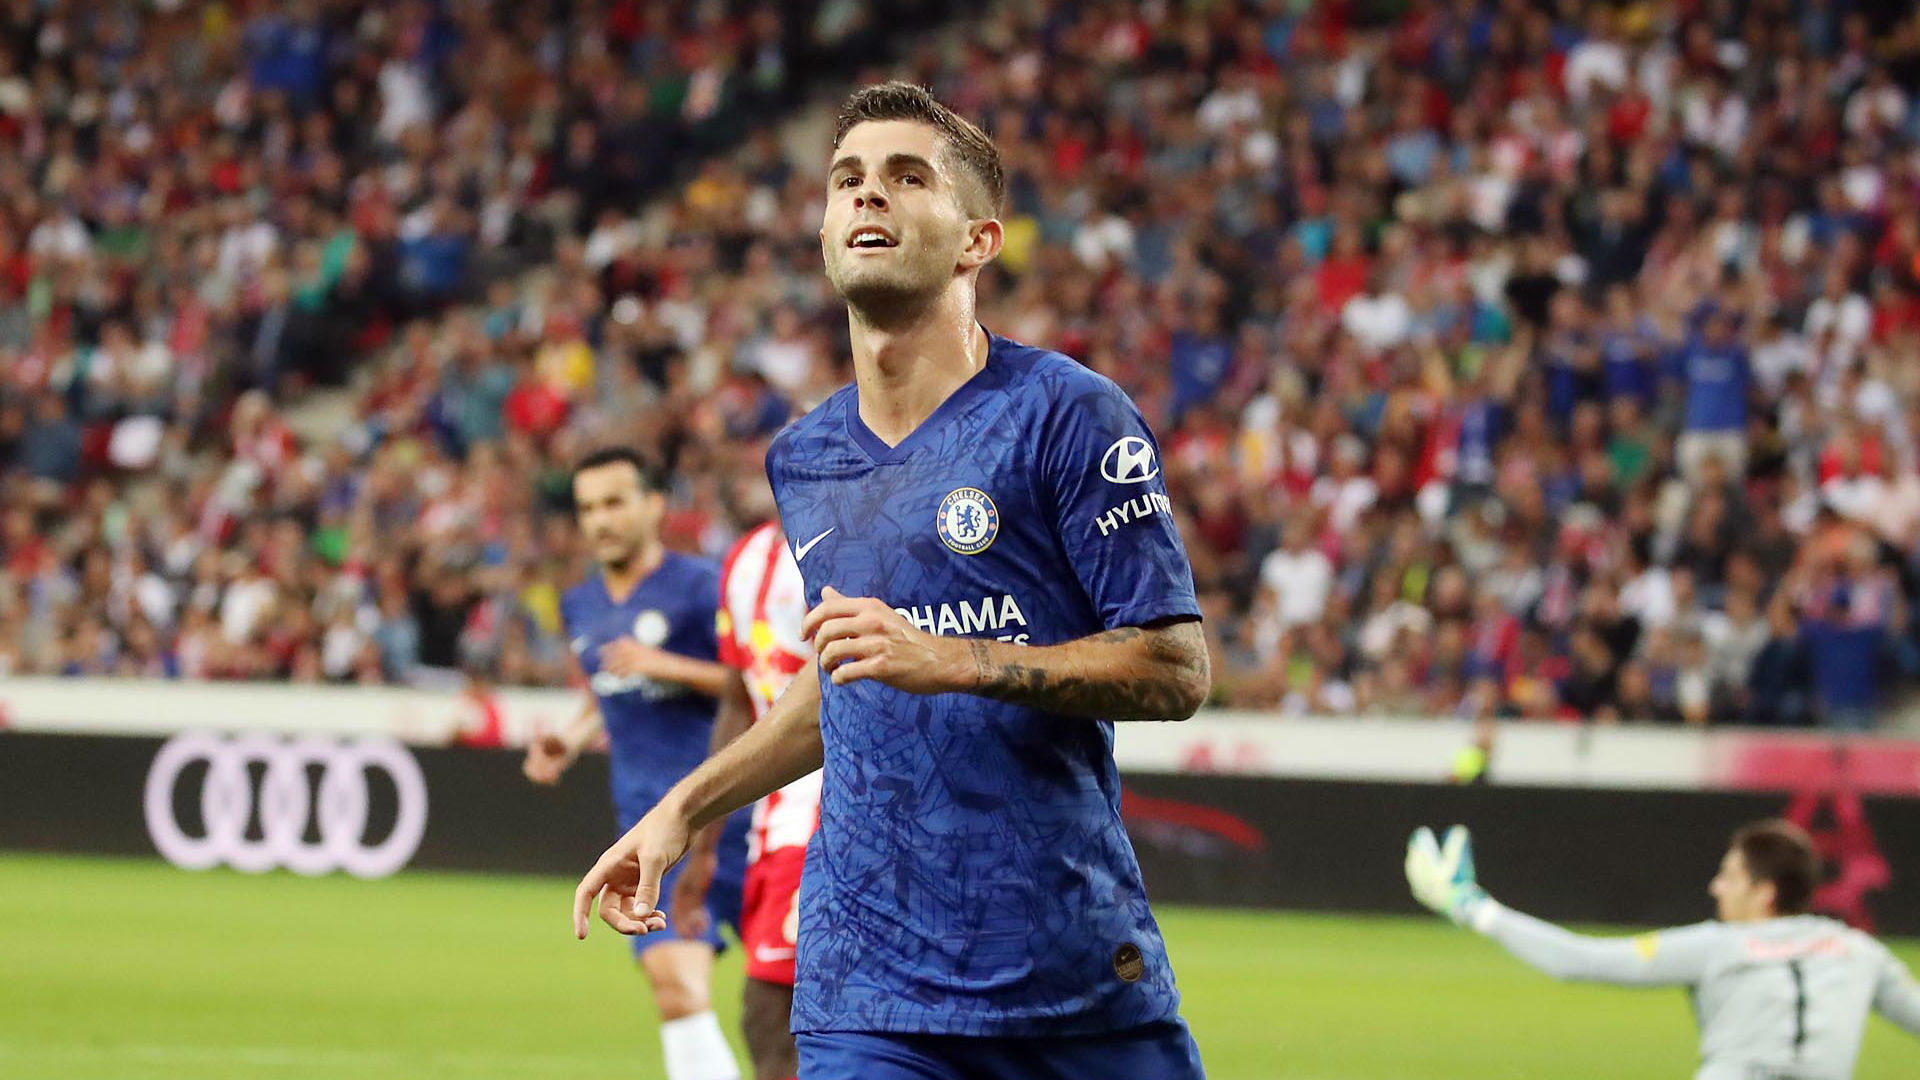 Christian Pulisic debut: Don't expect Chelsea wonderkid to be superstar